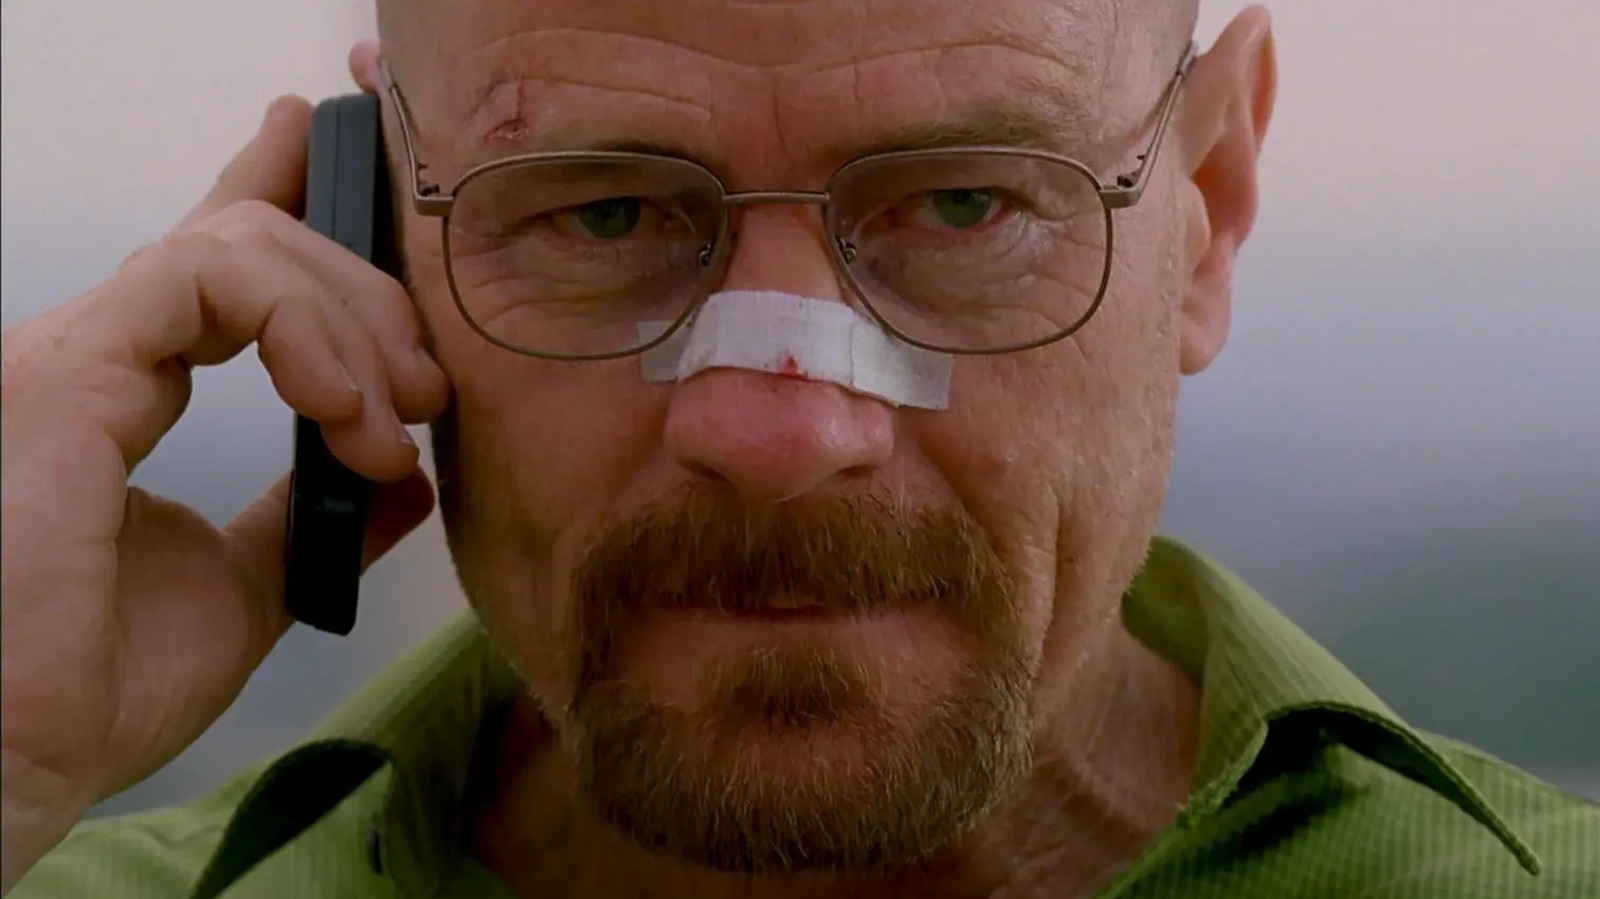 Breaking Bads Bryan Cranston Thinks A Pivotal Moment Was Walter Shaving His Head